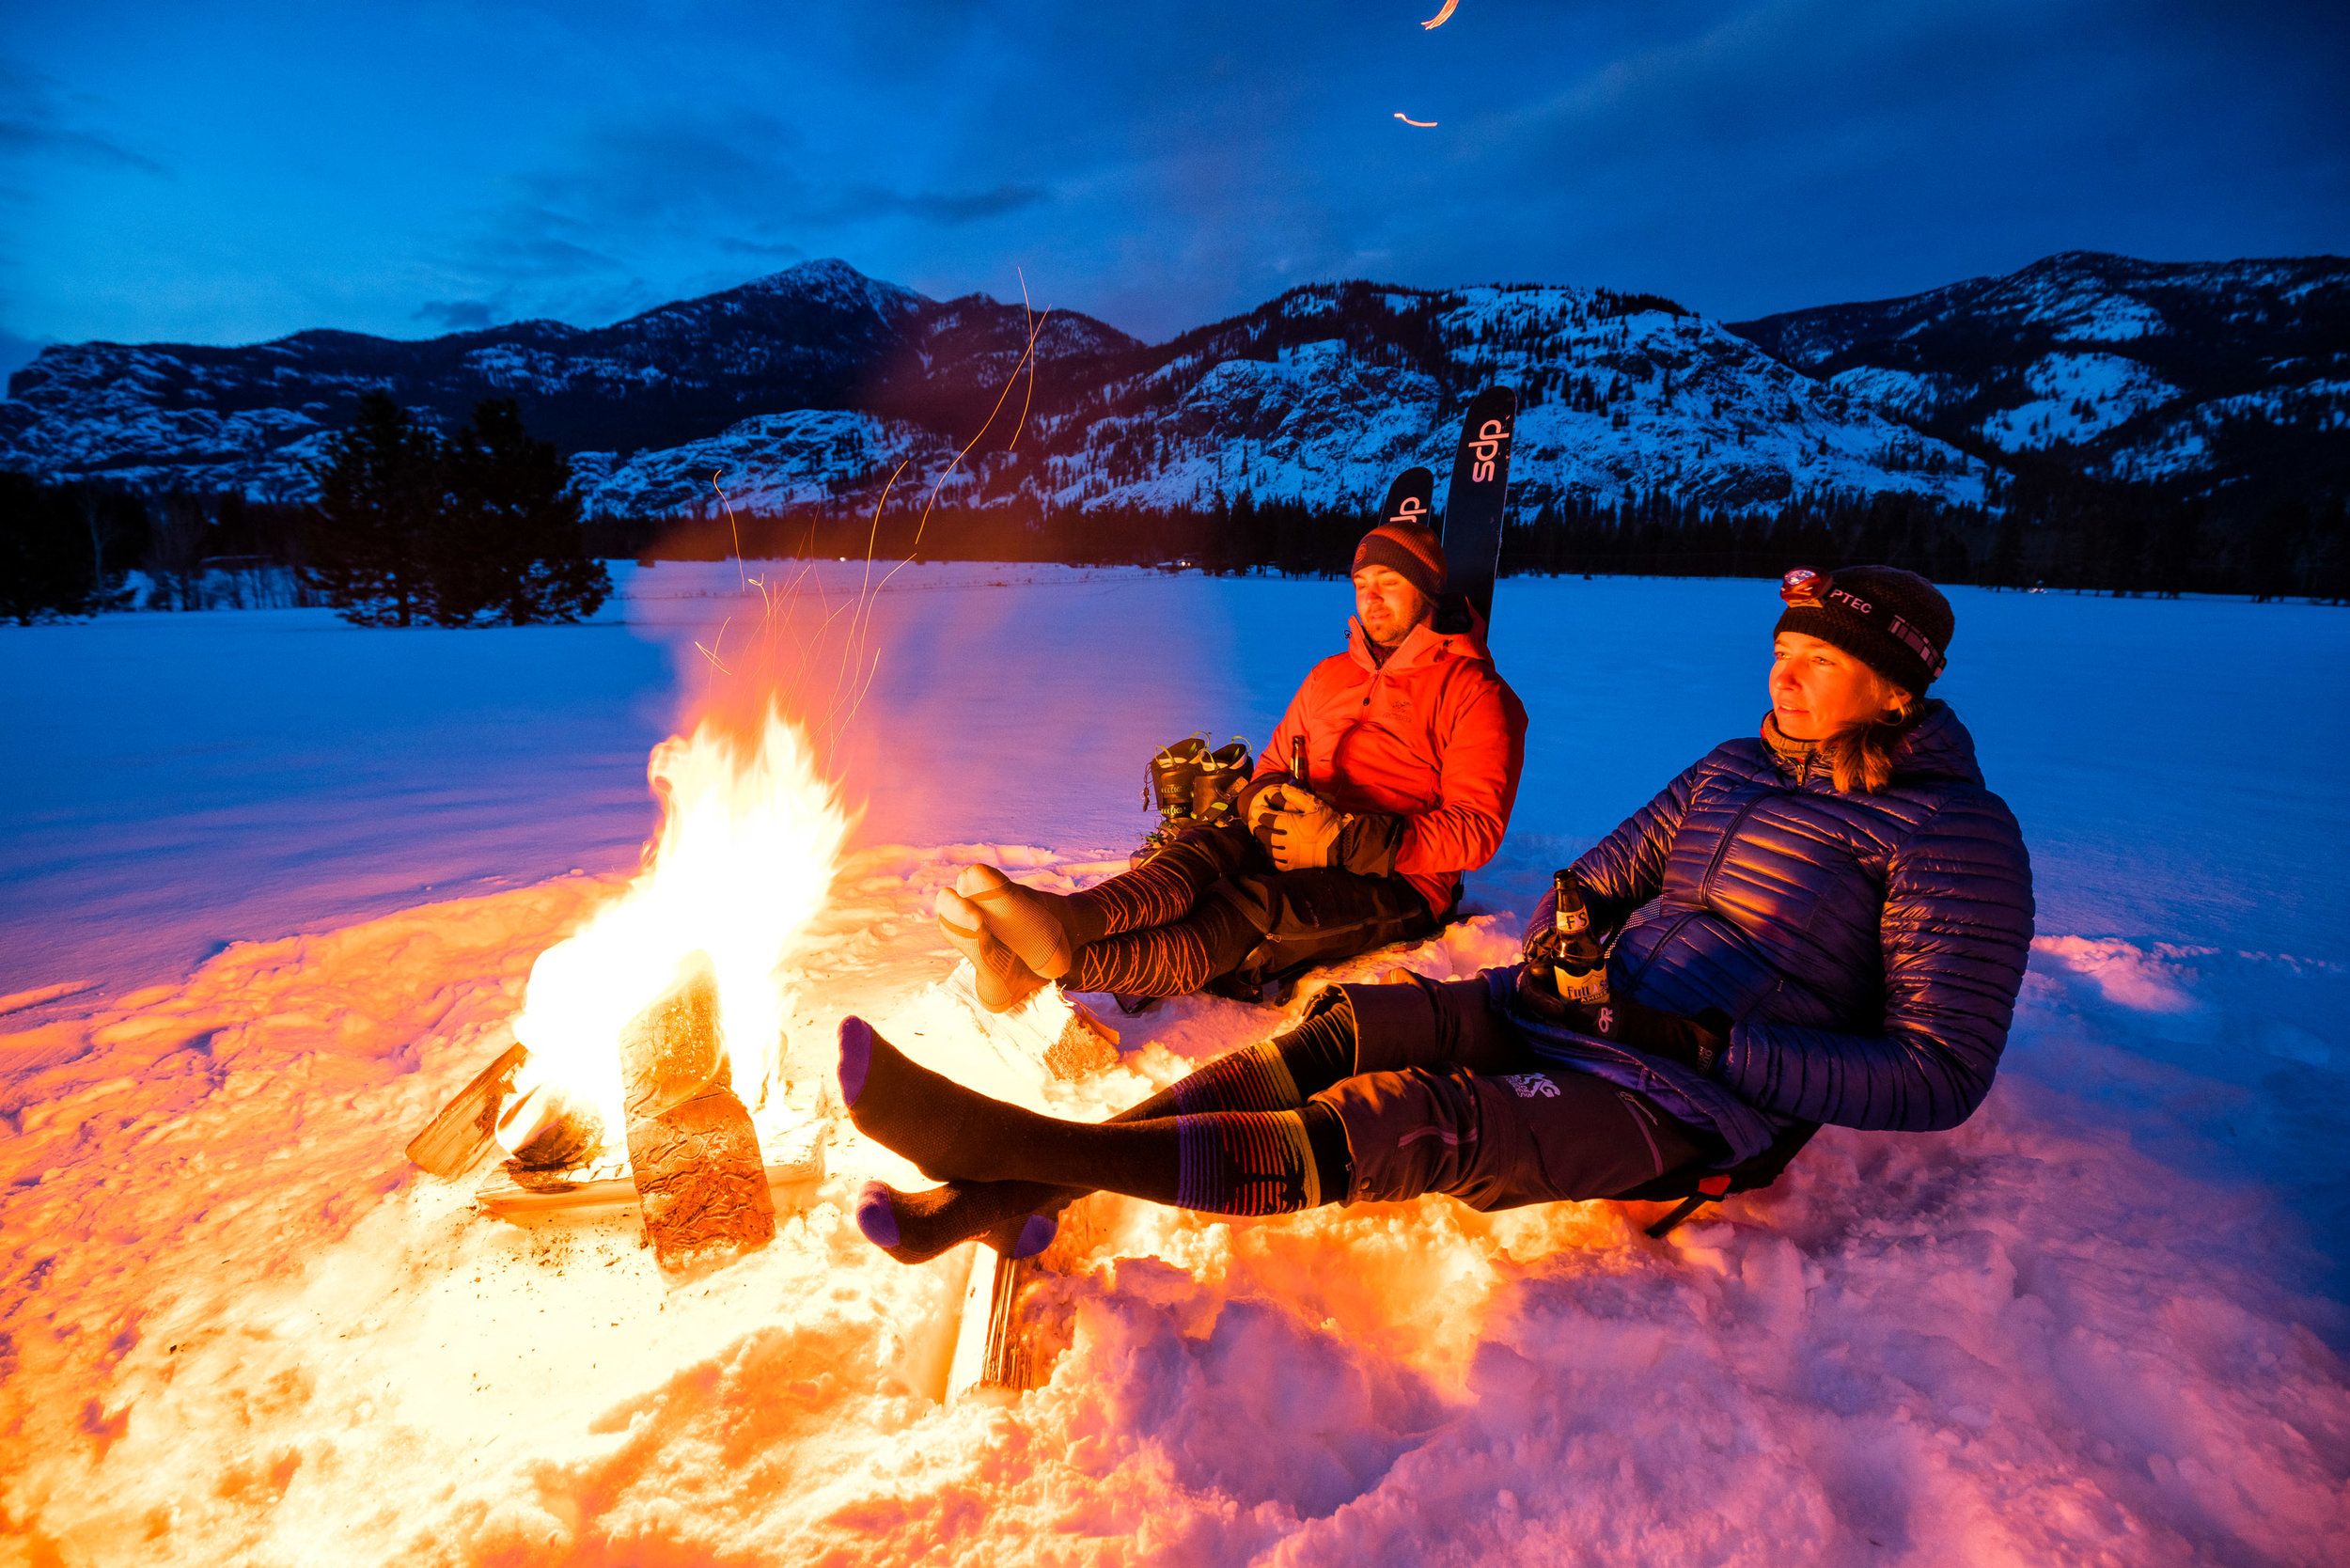  Lifestyle: A couple relaxing after a backcountry ski tour in the Methow Valley, Washington 